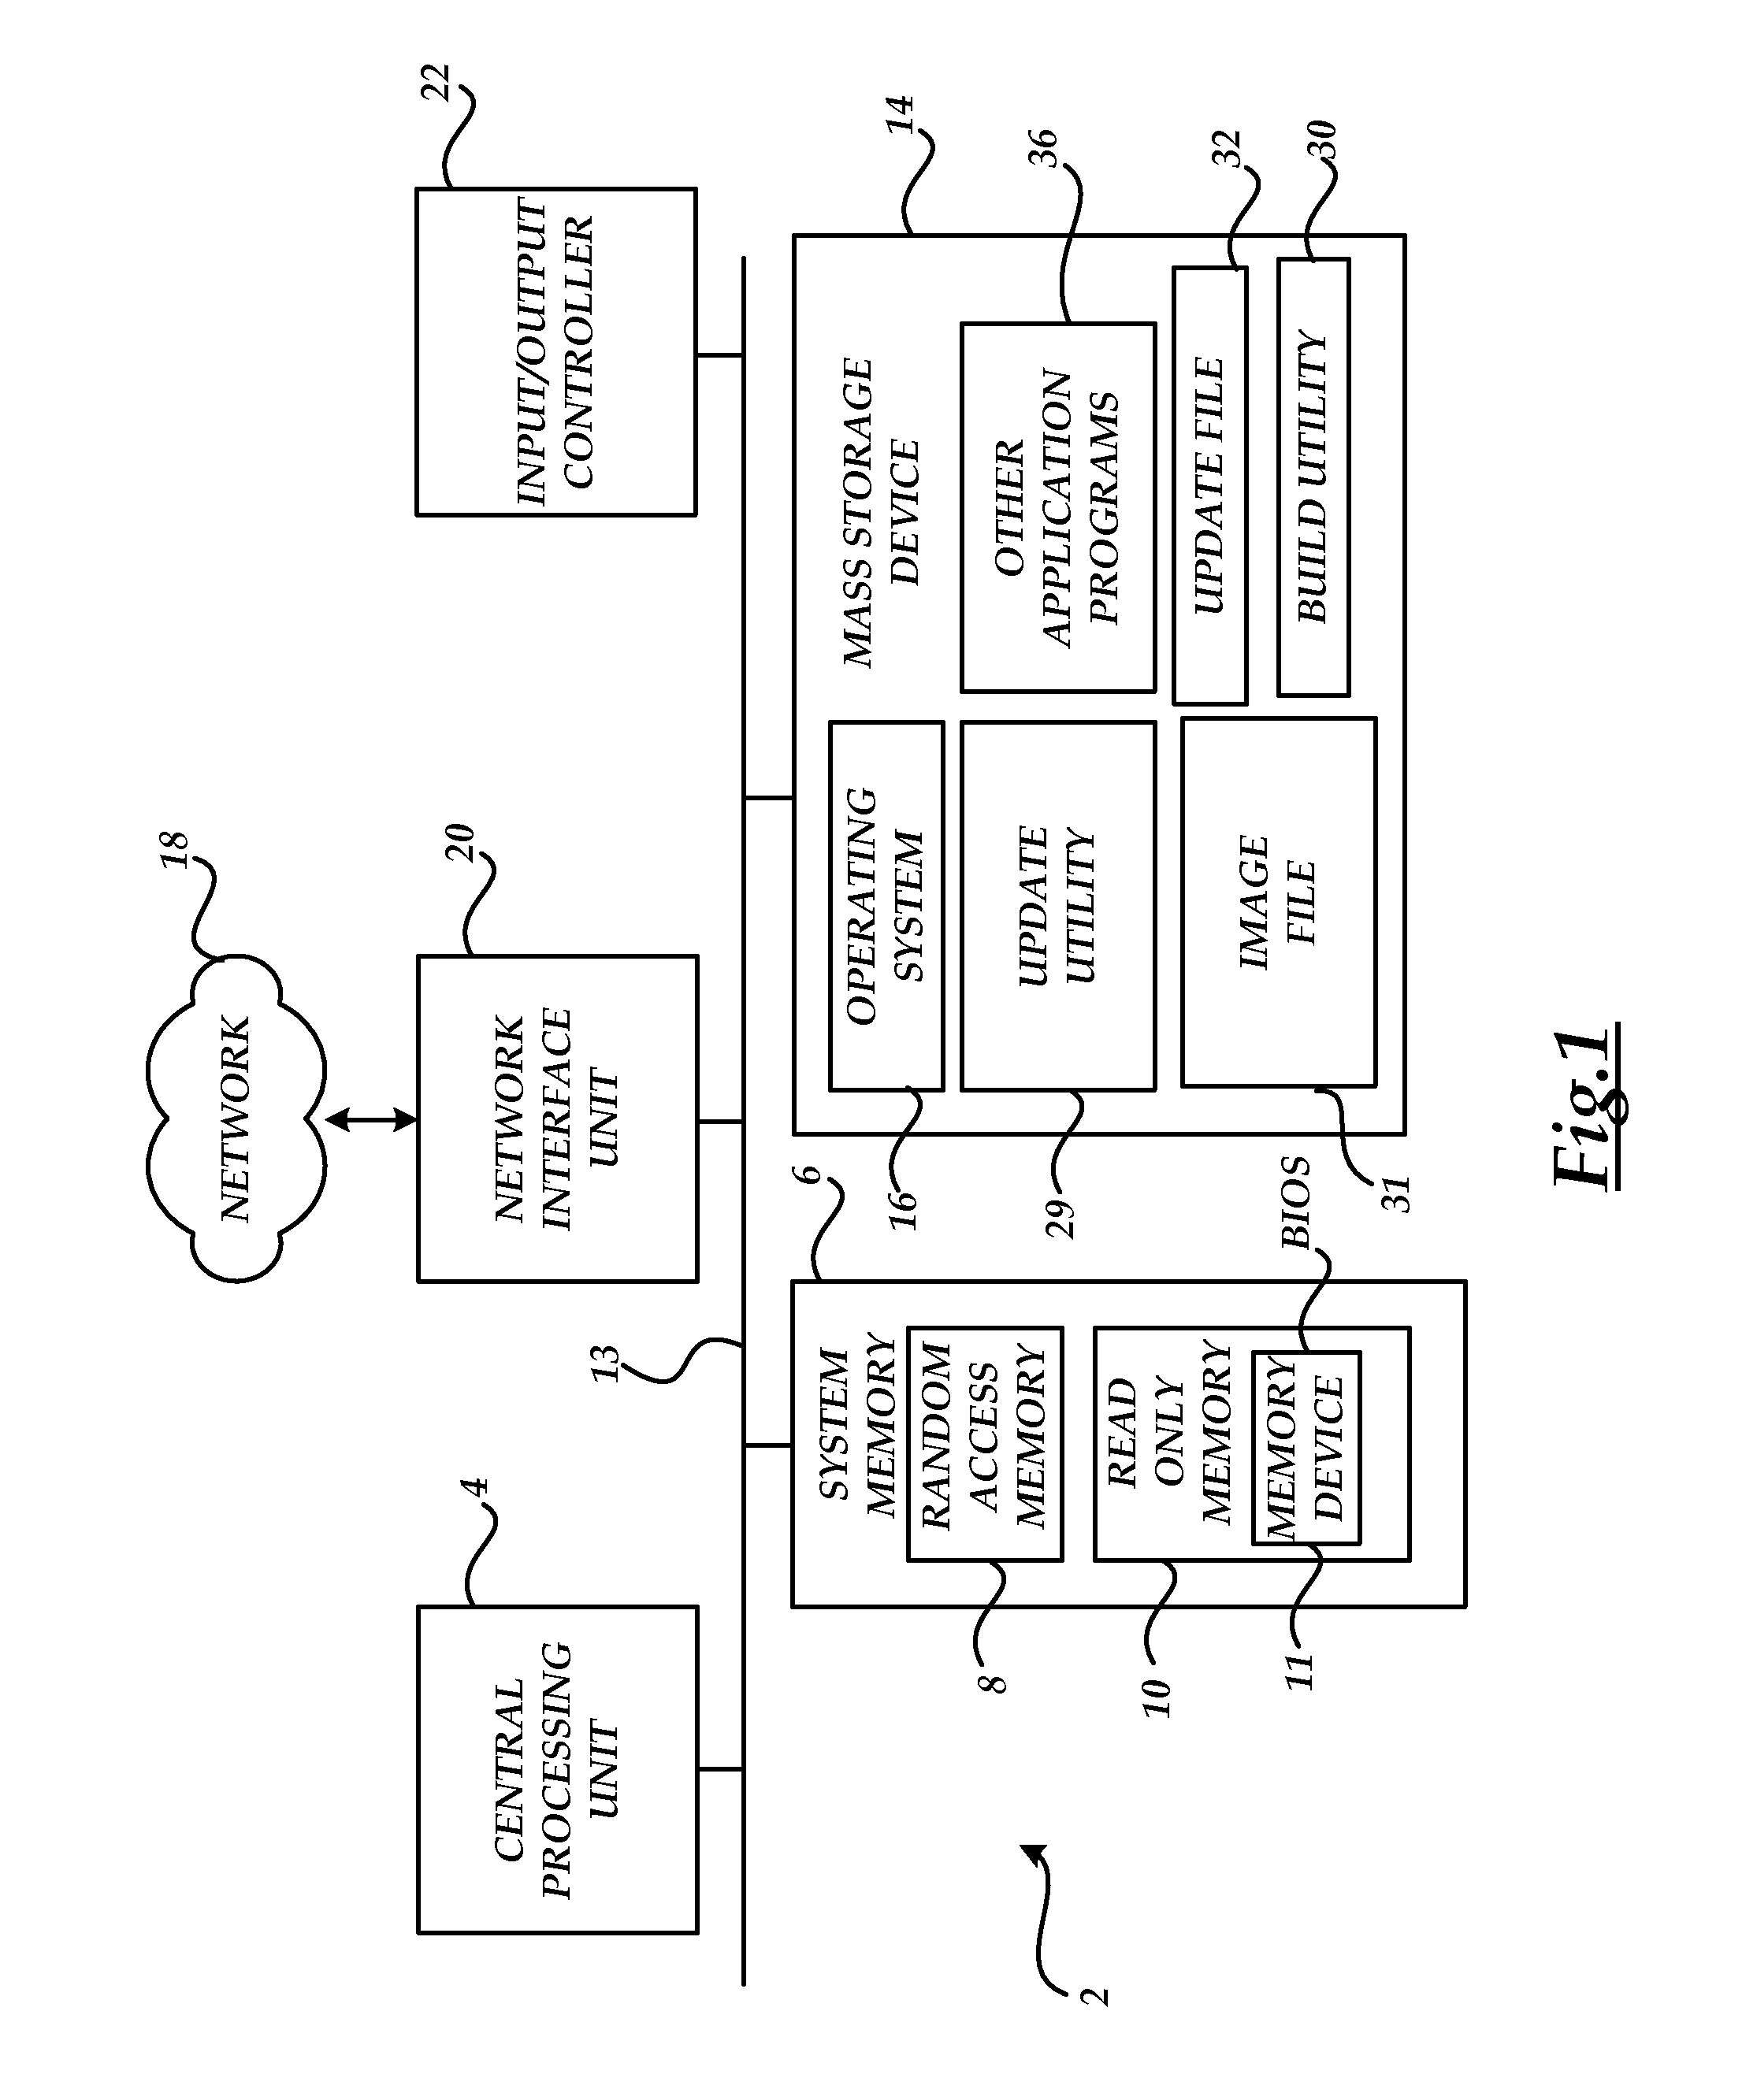 Method, system, and computer readable medium for updating and utilizing the contents of a non-essential region of a memory device